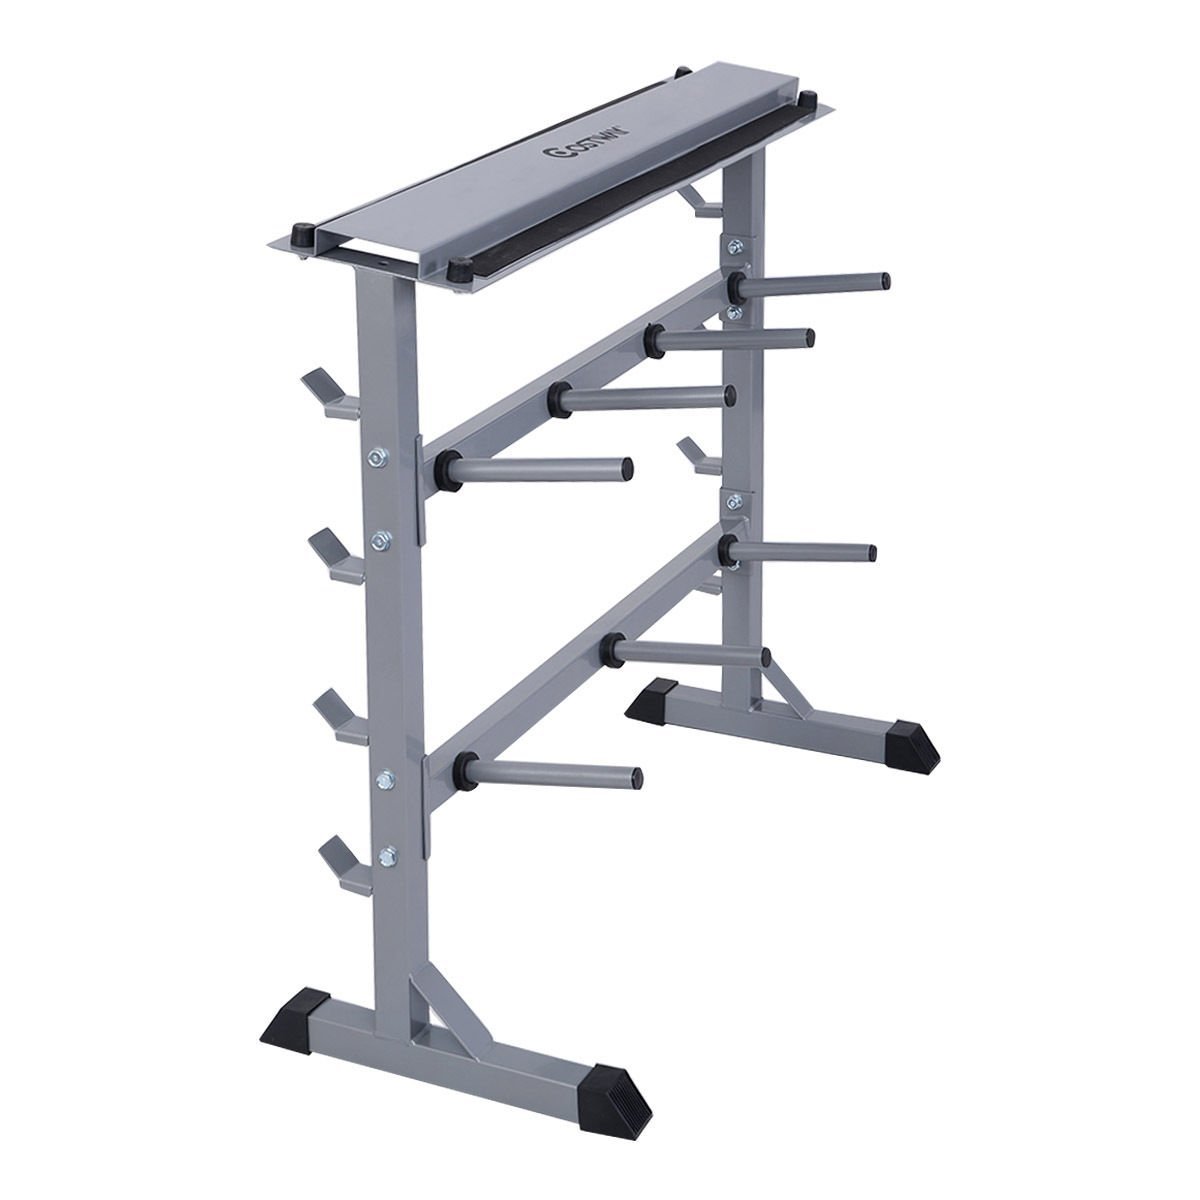 Giantex 2 Tier 40" Barbell Dumbbell Rack Weights Storage Stand Image